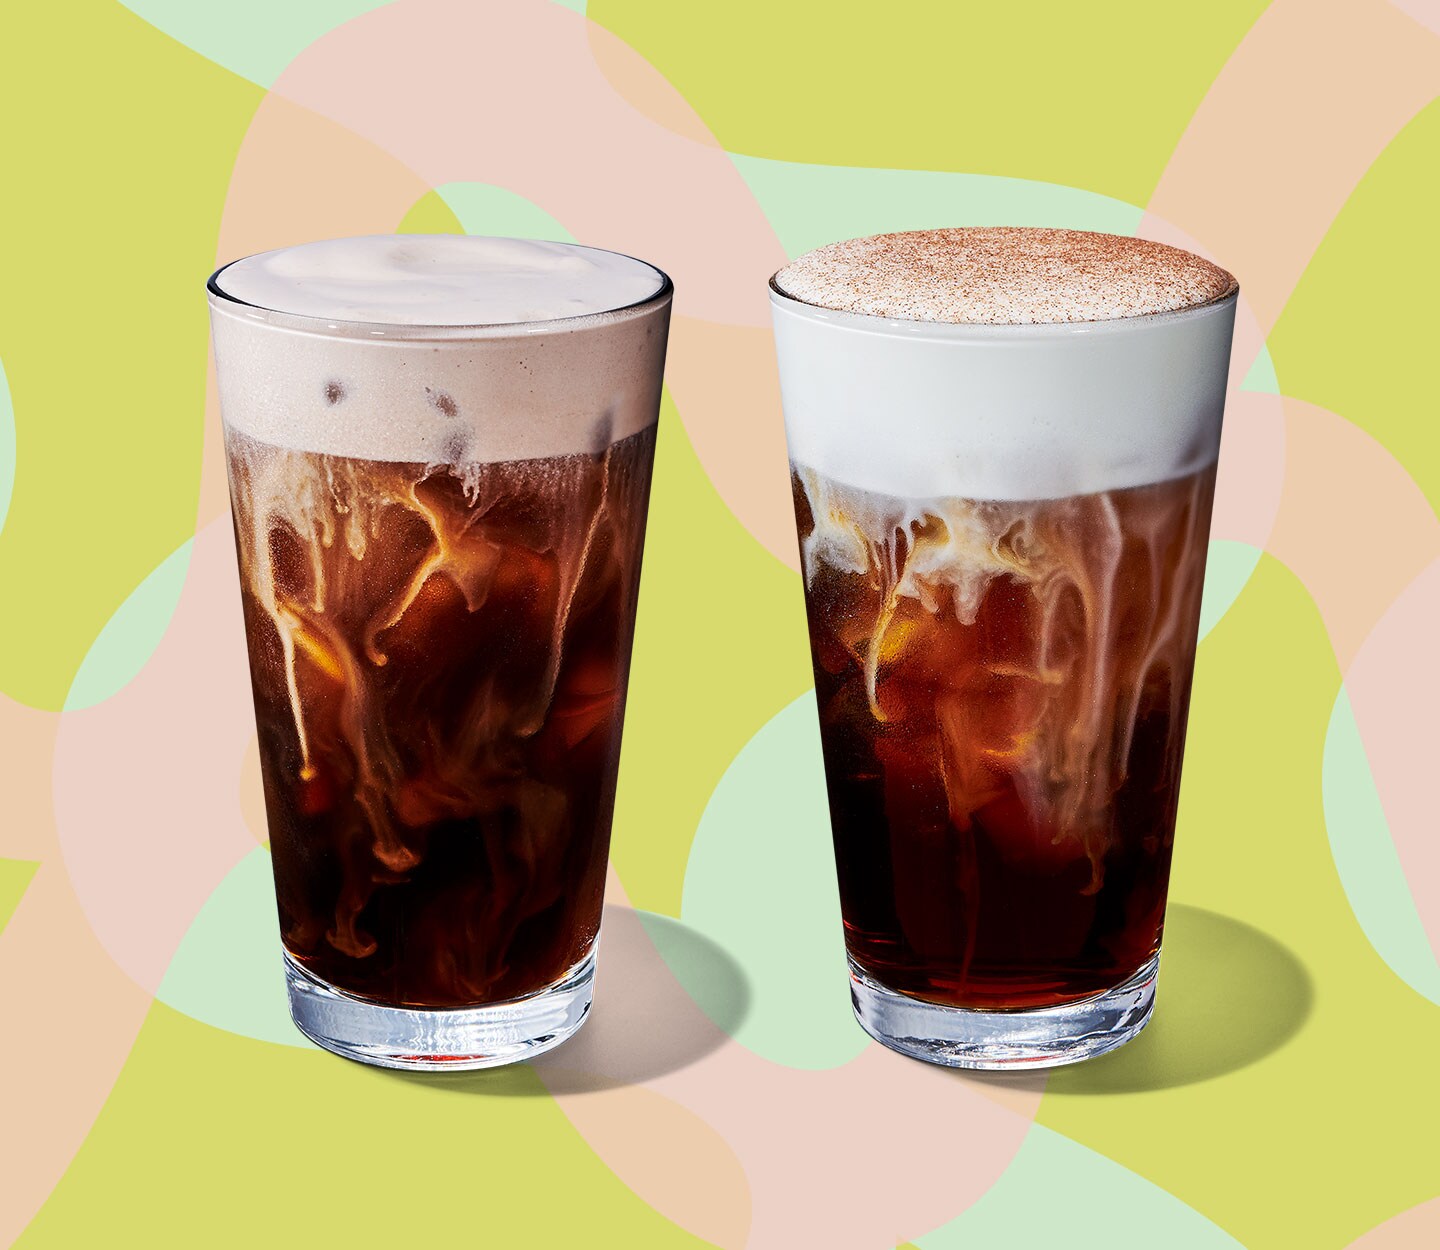 Two cold coffee drinks, each with a thick, foamy topping.